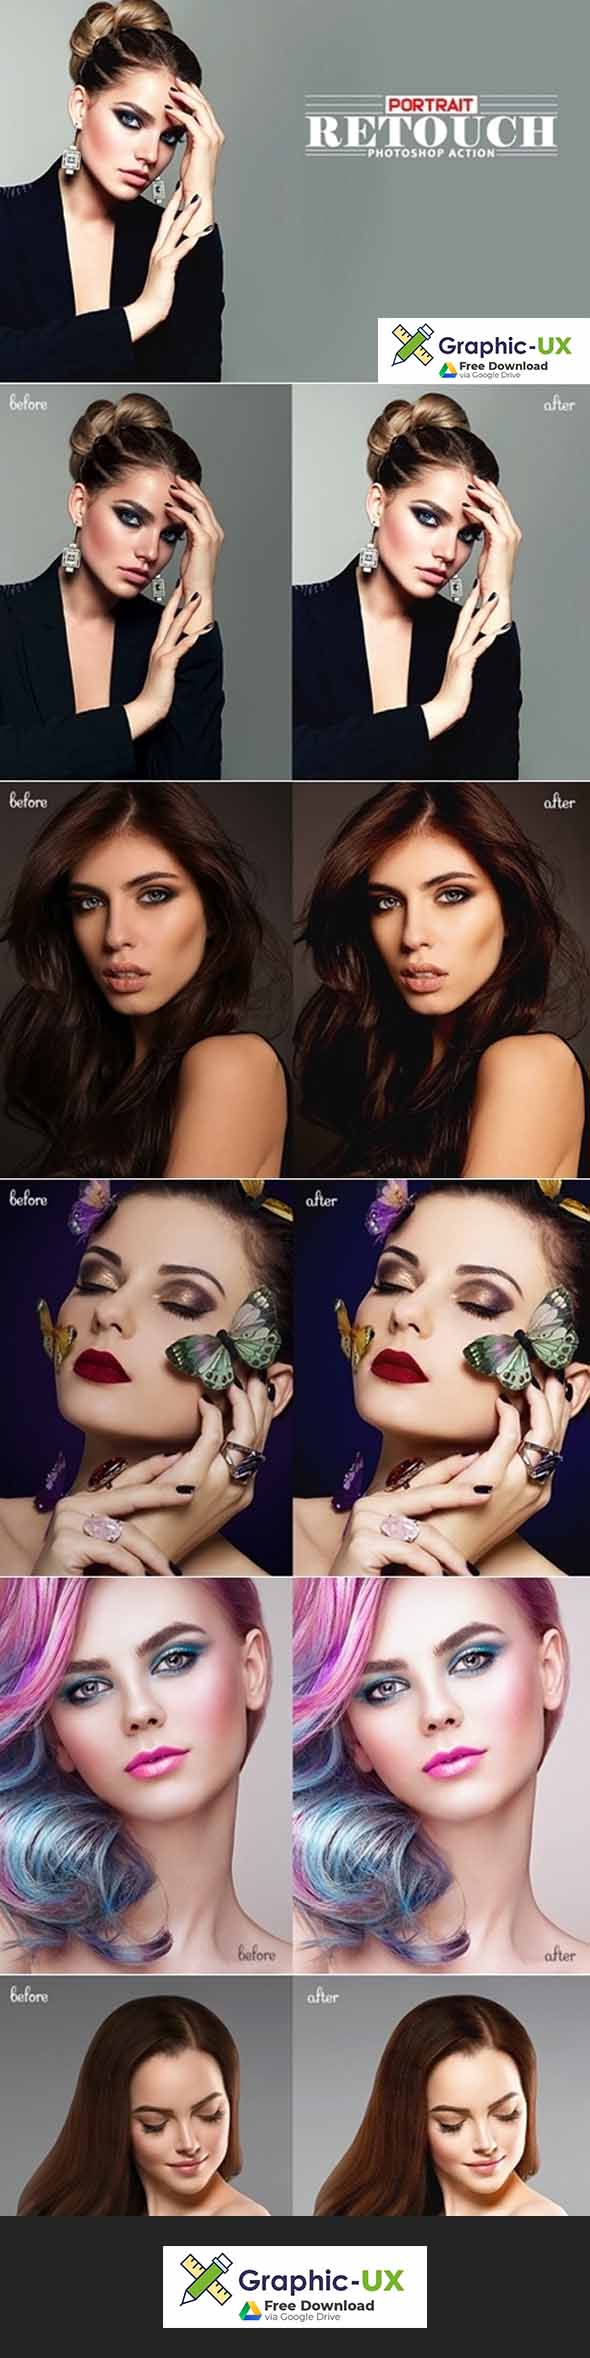 photoshop retouch actions free download